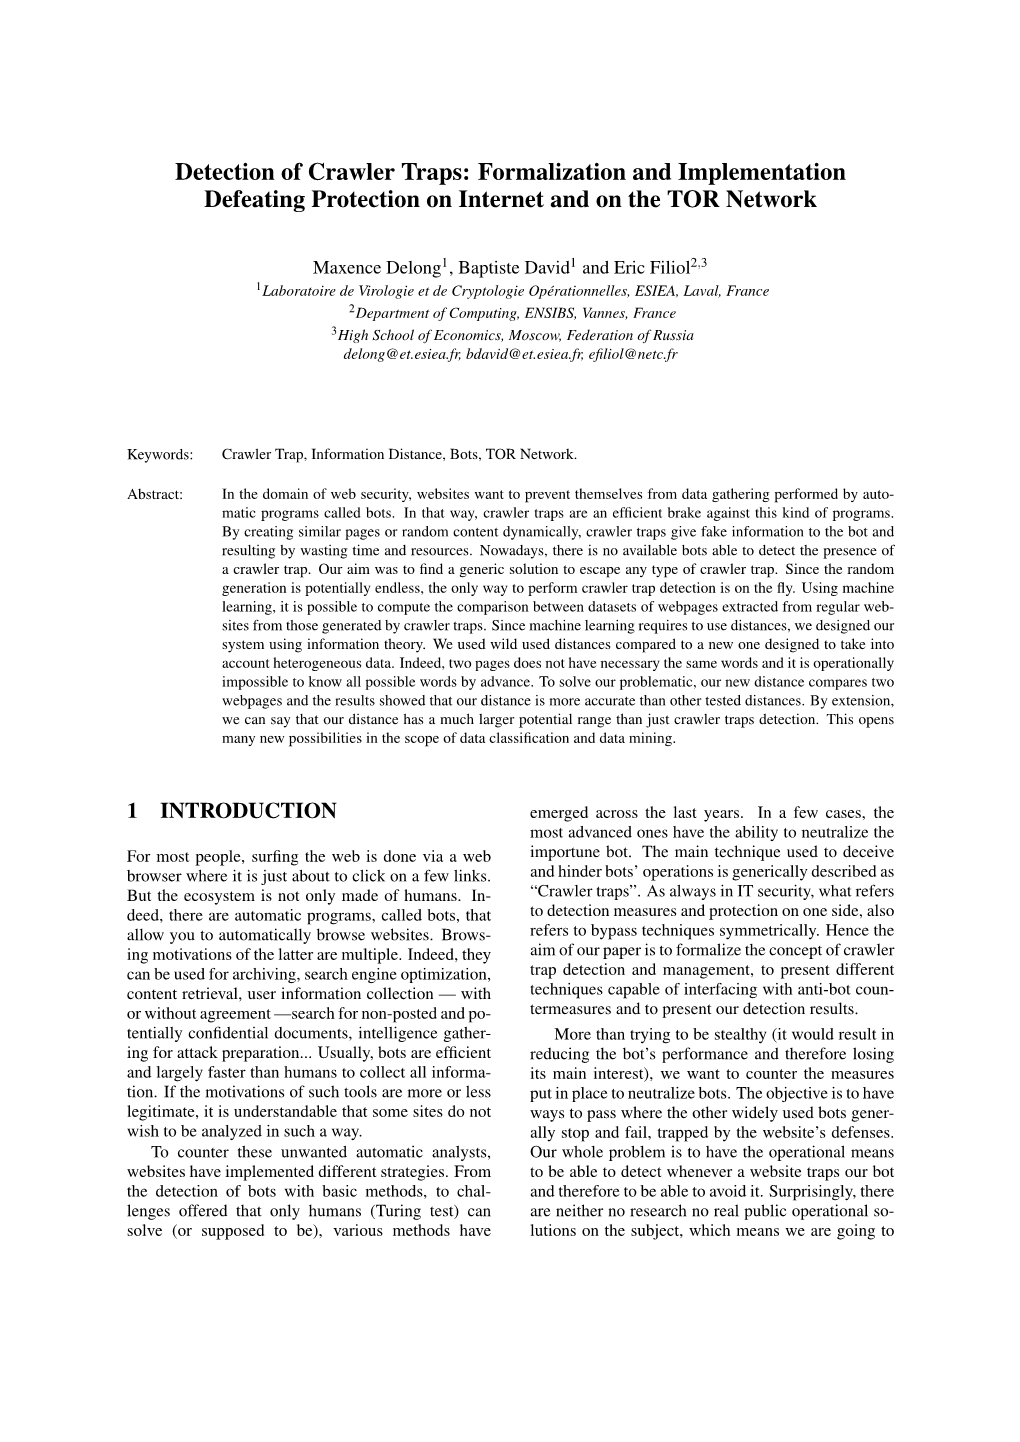 Detection of Crawler Traps: Formalization and Implementation Defeating Protection on Internet and on the TOR Network